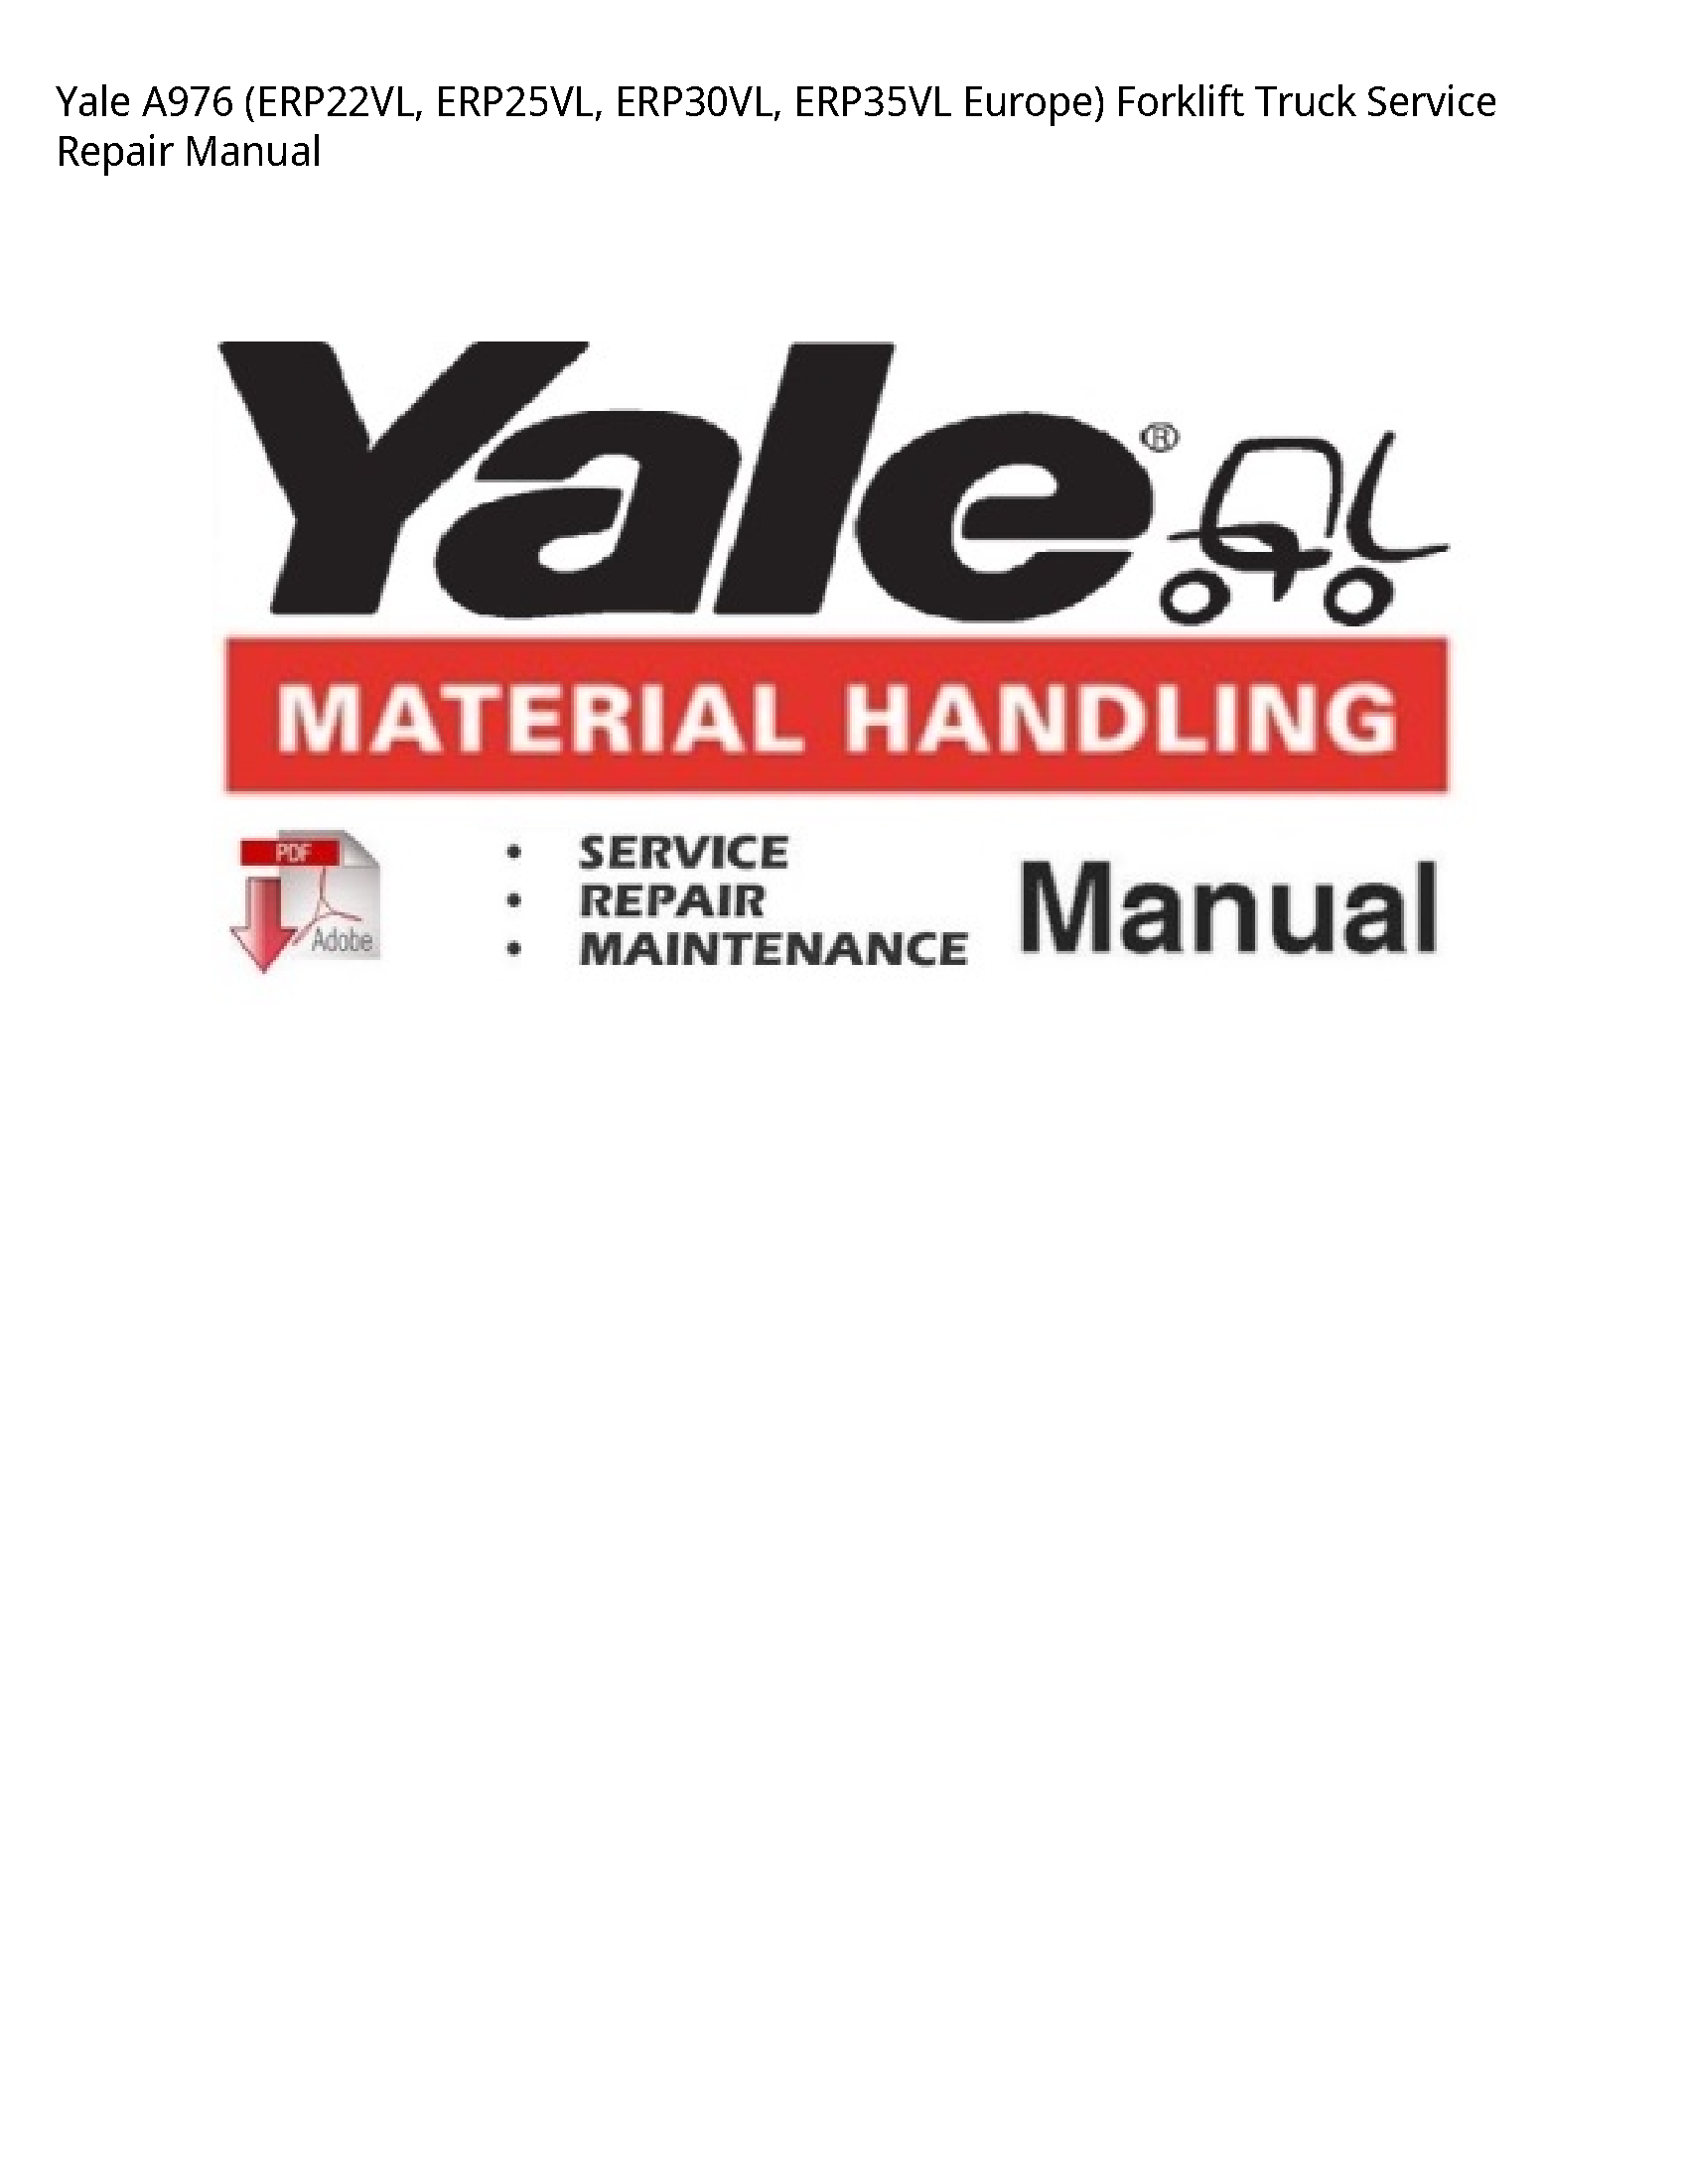 Yale A976 Europe) Forklift Truck manual